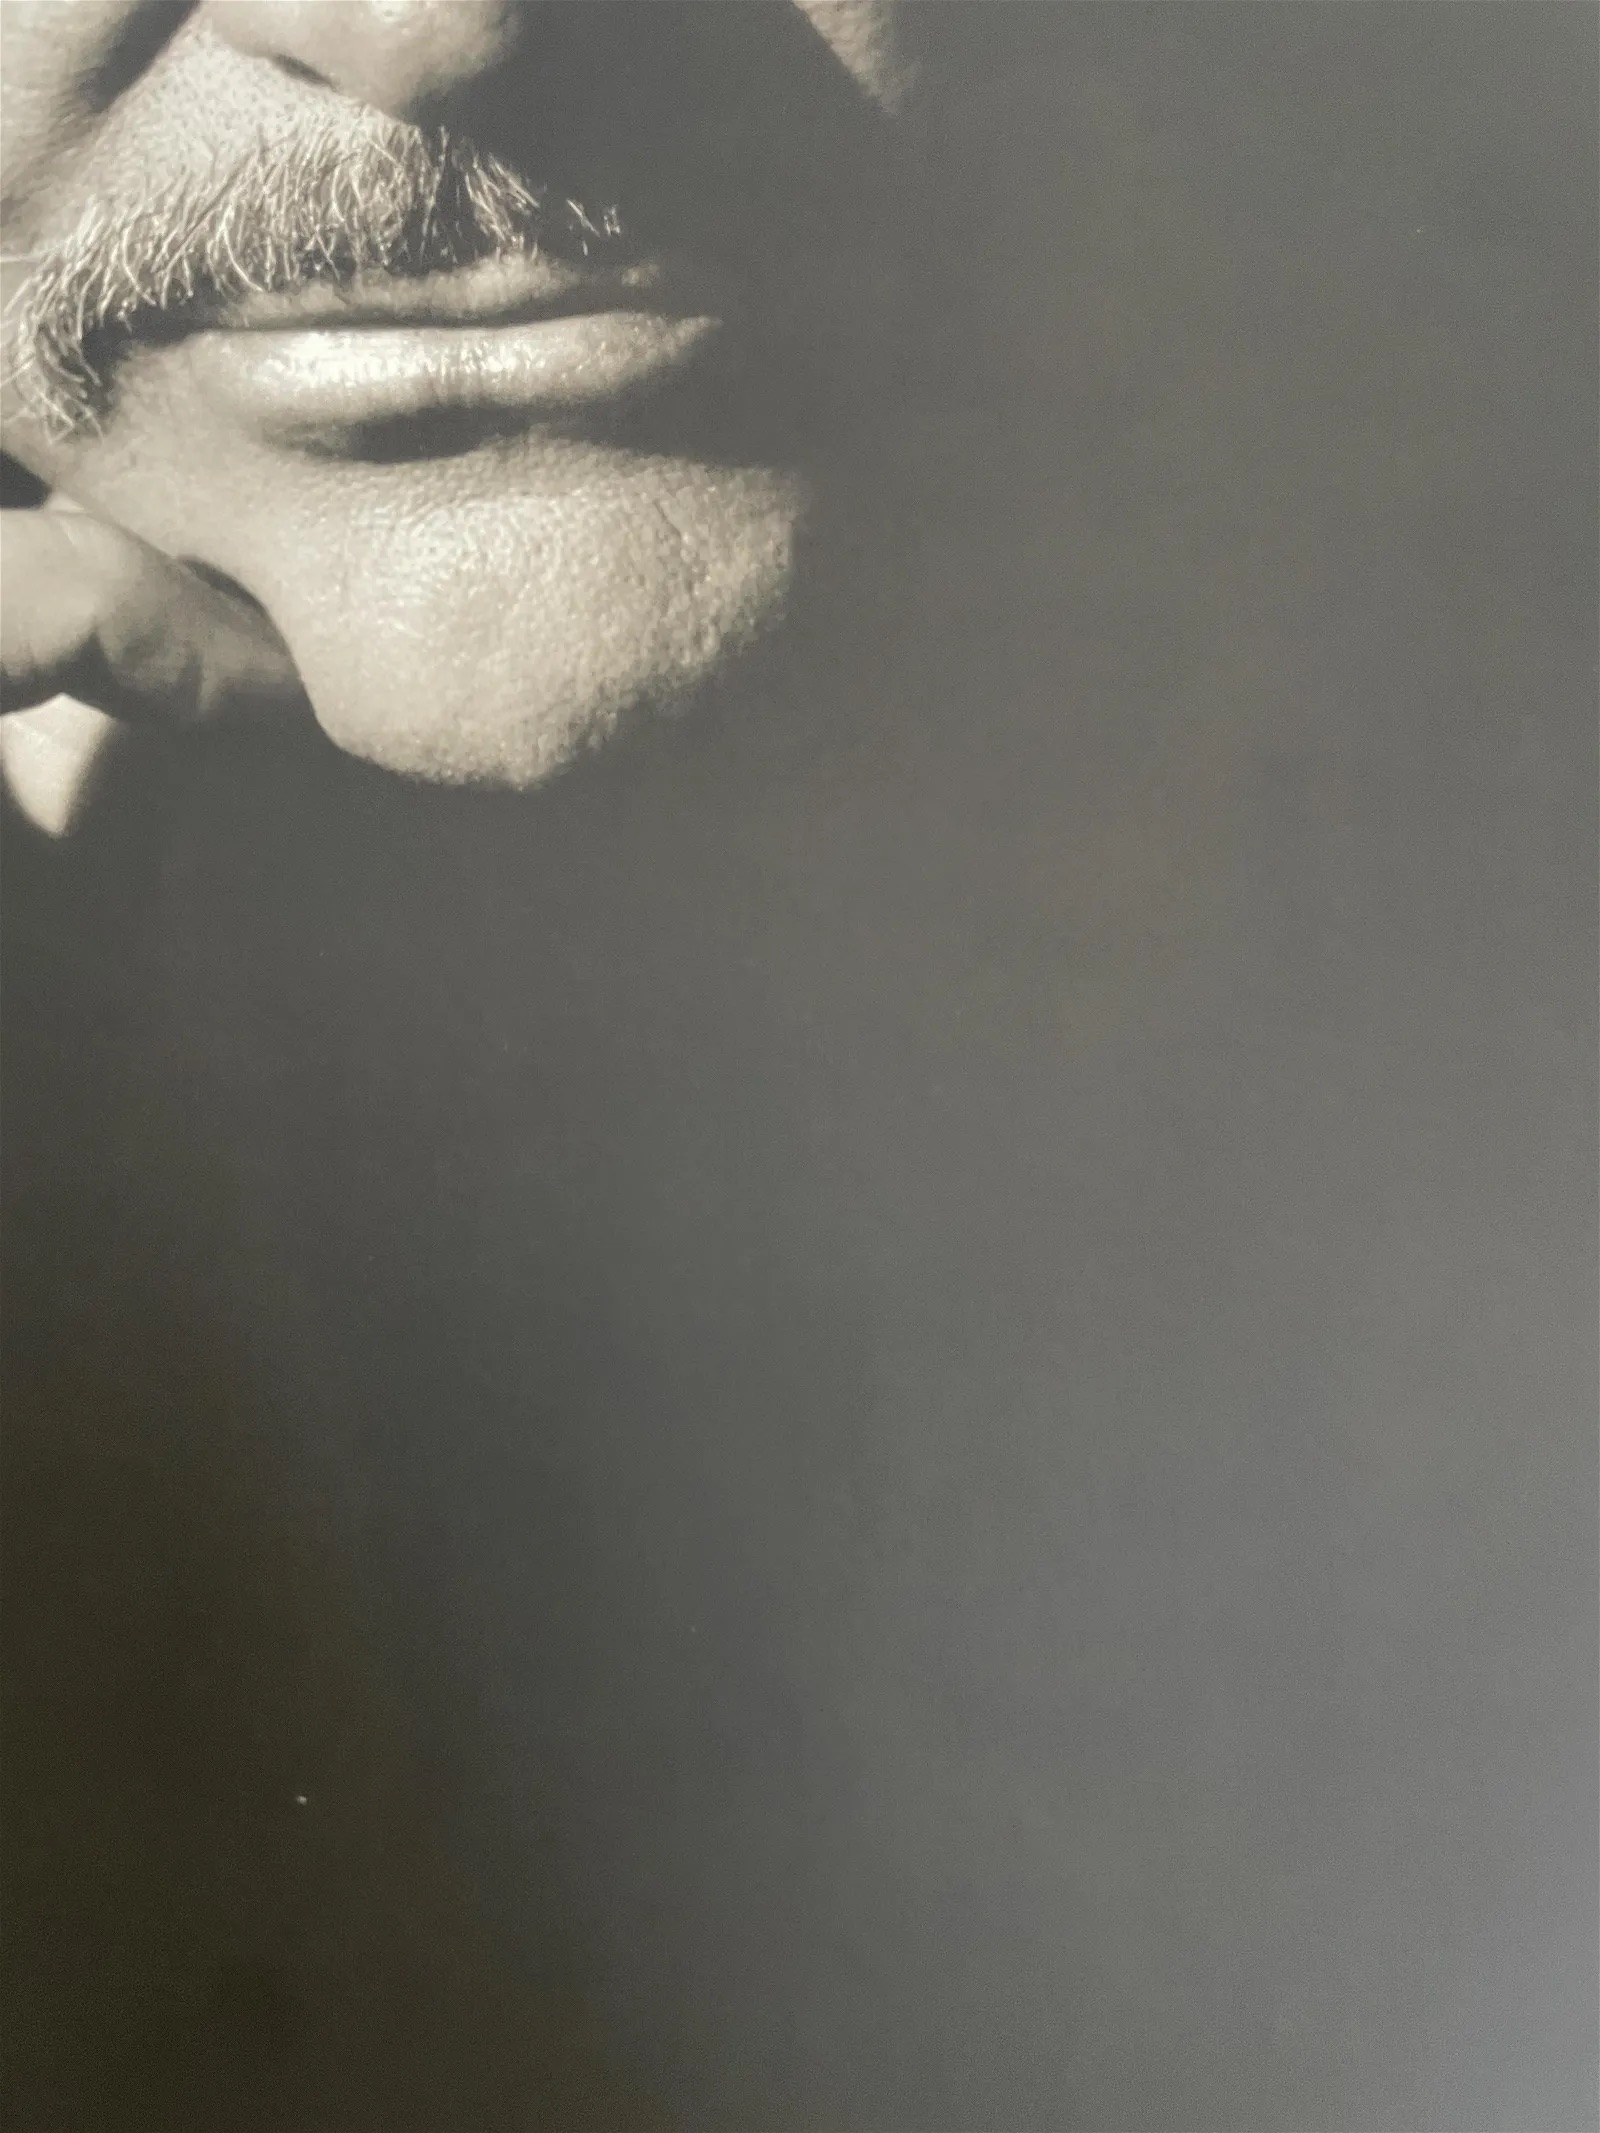 Herb Ritts "Sean Connery, Hollywood, 1989" Print - Image 5 of 6